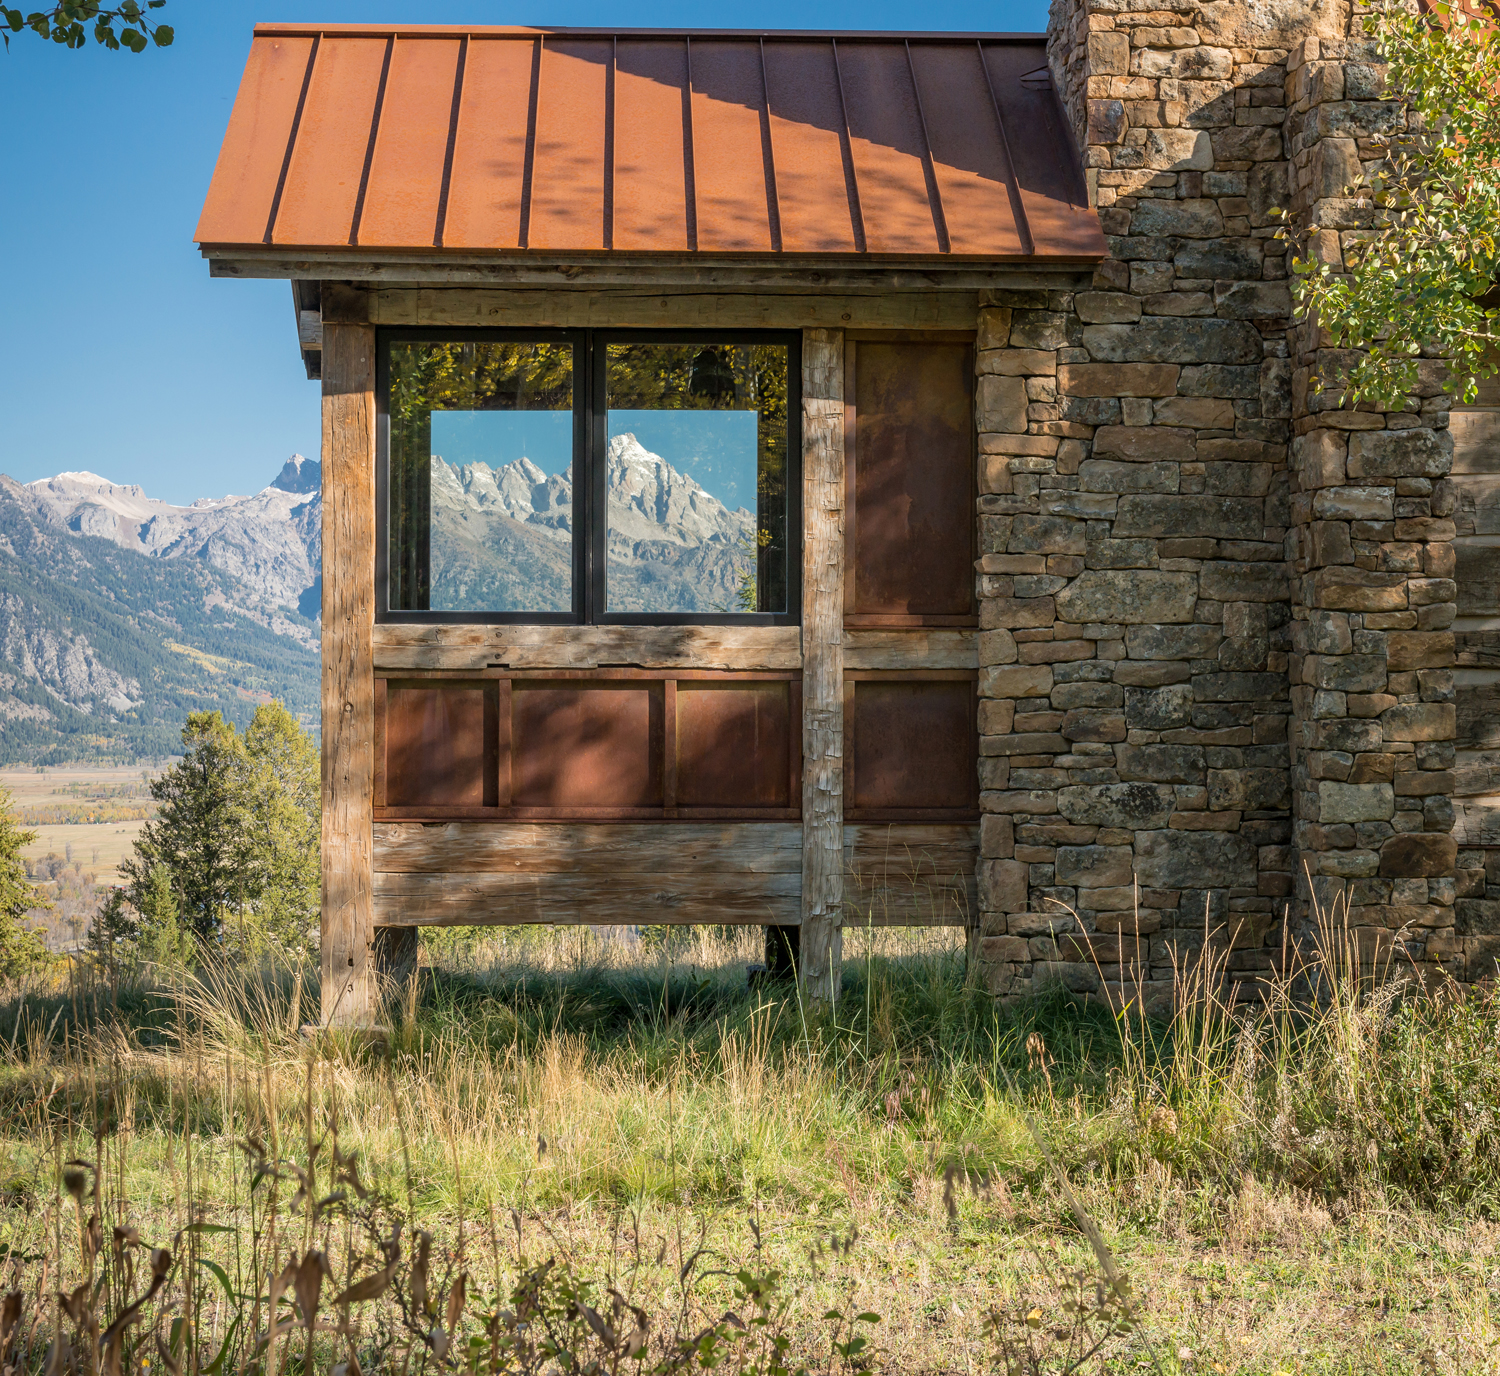 “Foundations” features 16 houses, including this Jackson Hole homestead, that demonstrate JLF’s place-based philosophy, using antique materials and heritage building methods (PC: Audrey Hall).